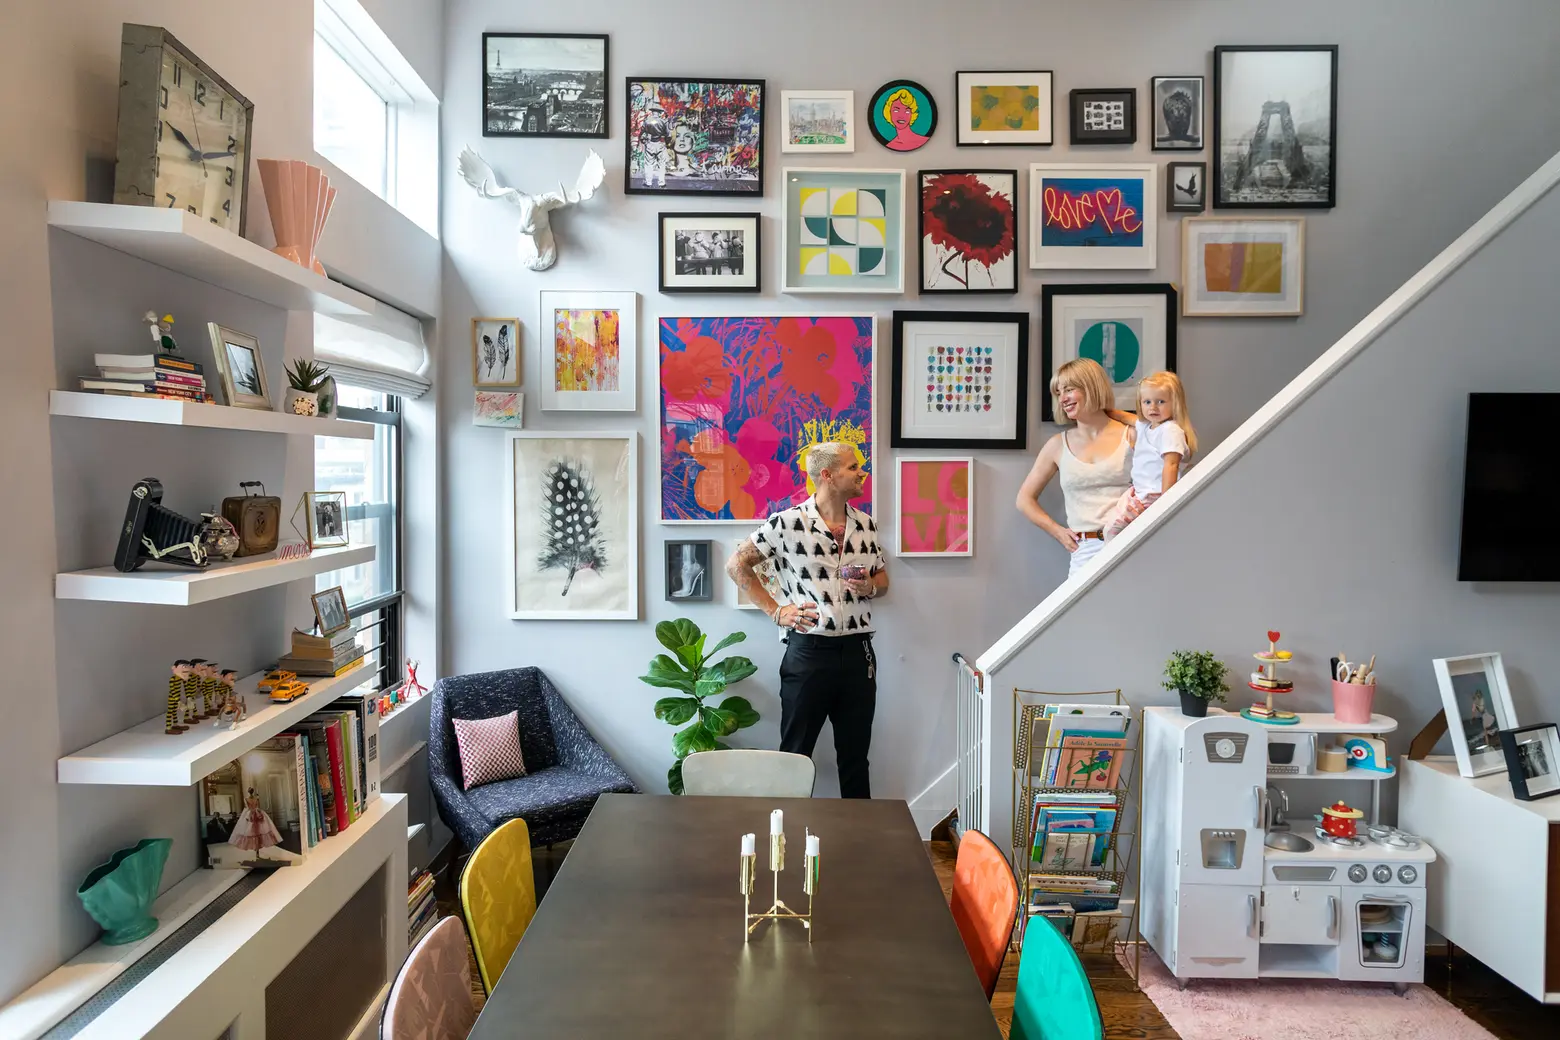 My 1,400sqft: A bright Chelsea duplex does live-work duty for a hair stylist and her family